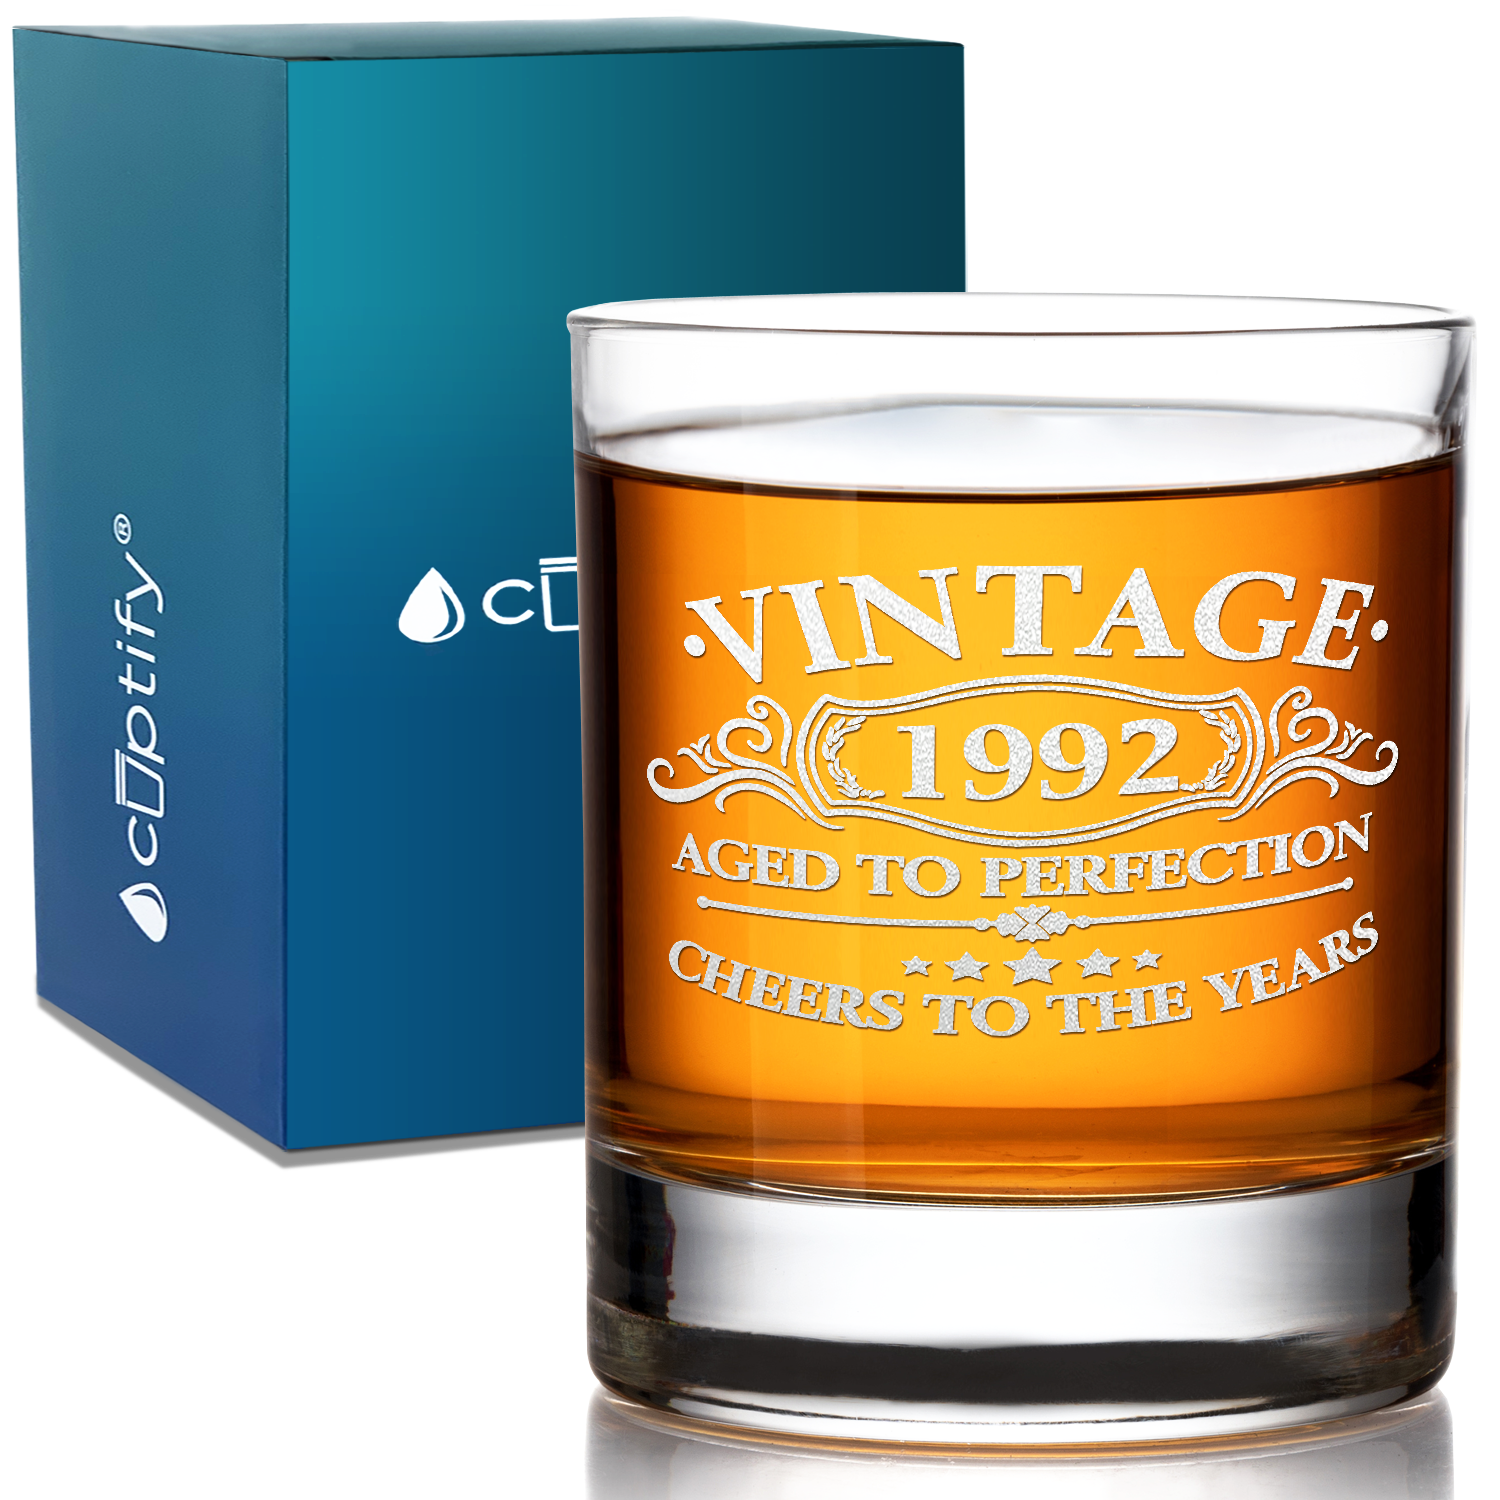 Vintage Aged To Perfection Cheers To 29 Years 1992 Laser Engraved on 10.25oz Old Fashion Glass